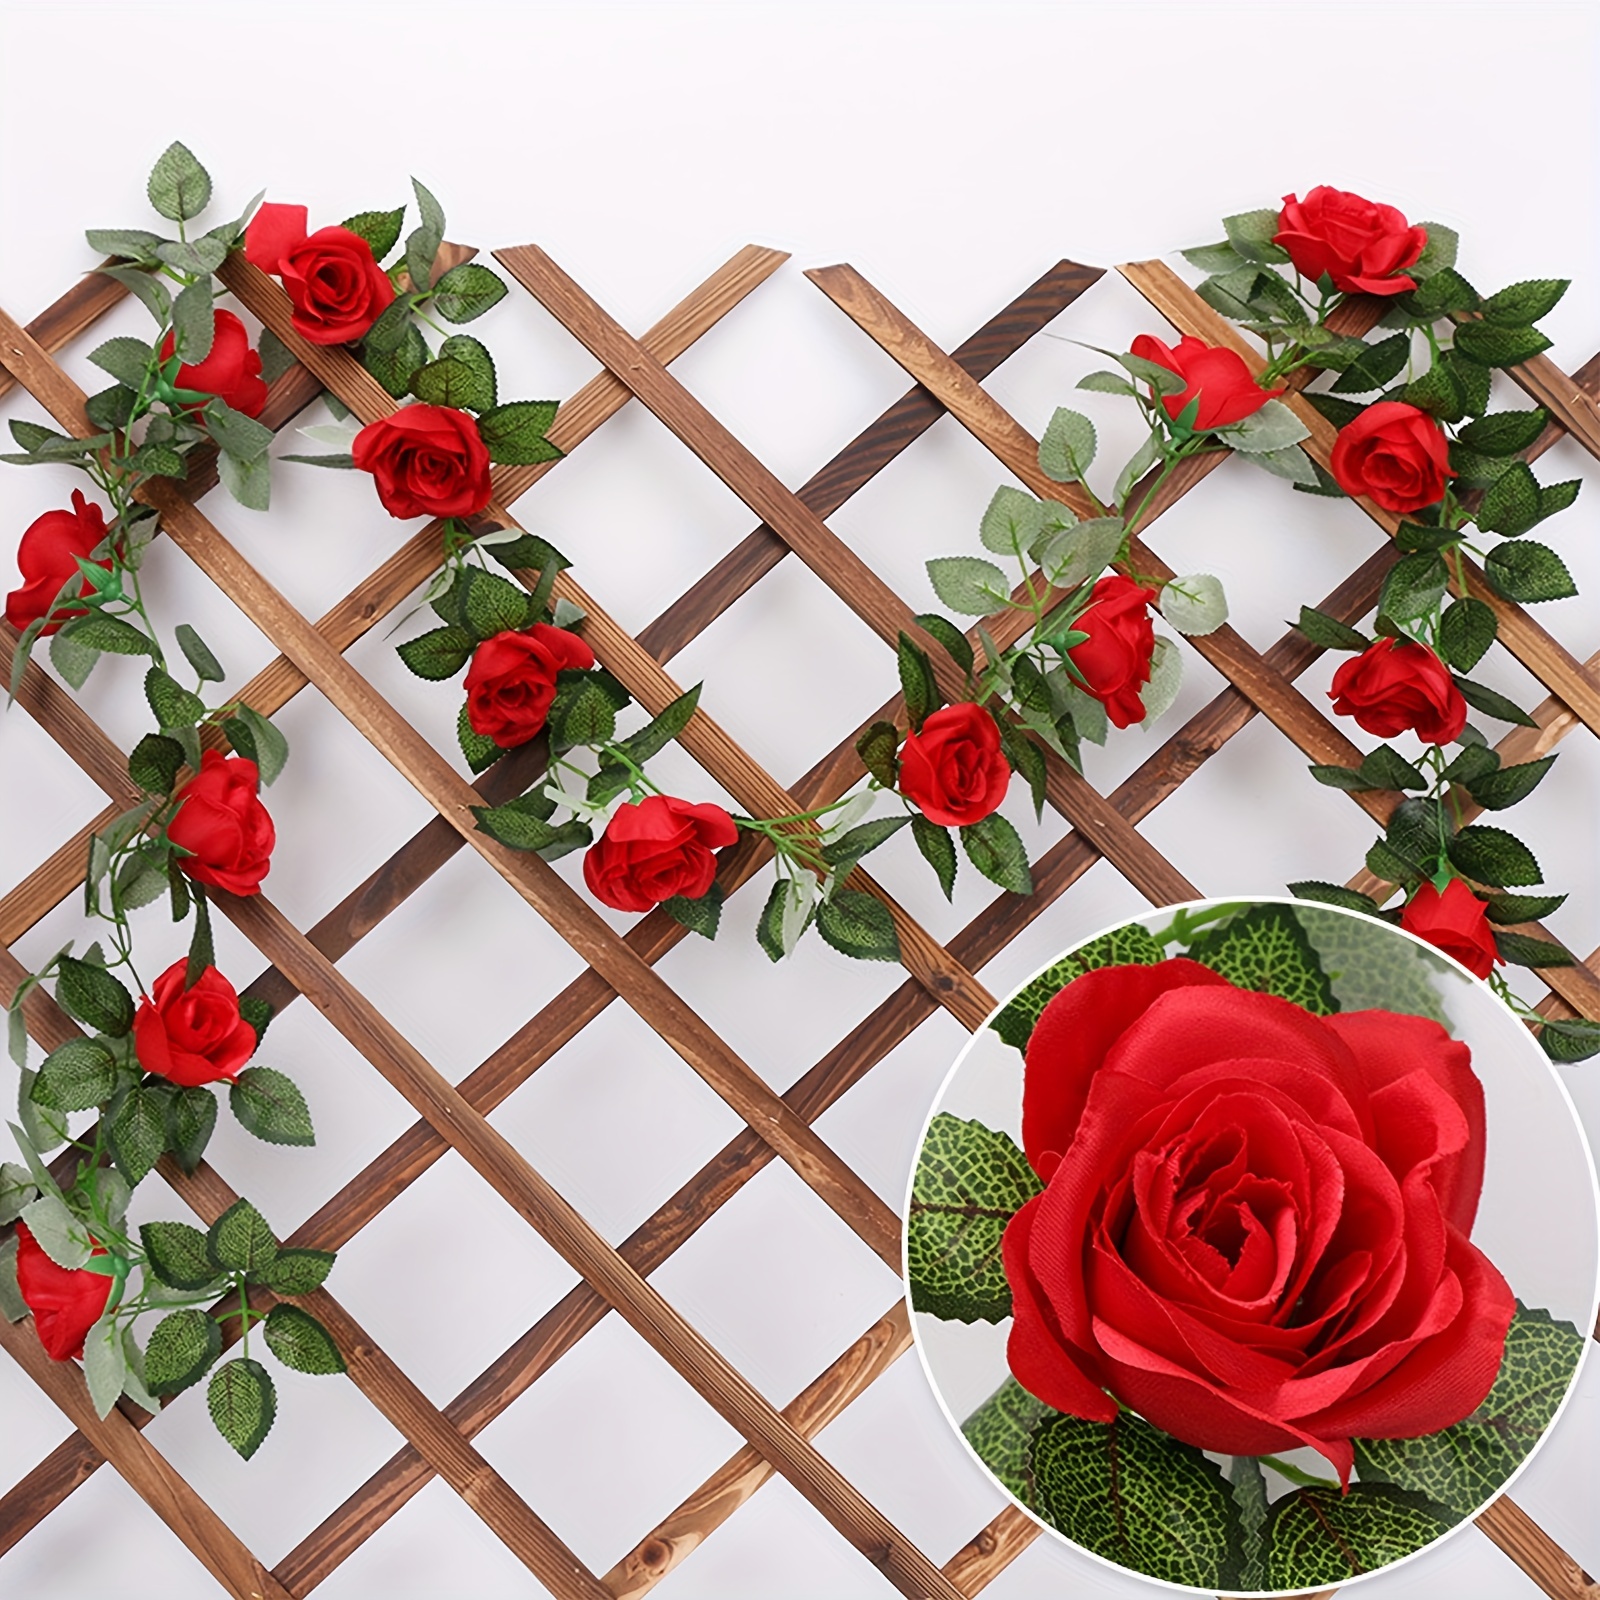 1pc Artificial Rose Vine Flowers With Green Leaves 86 61 Fake Silk